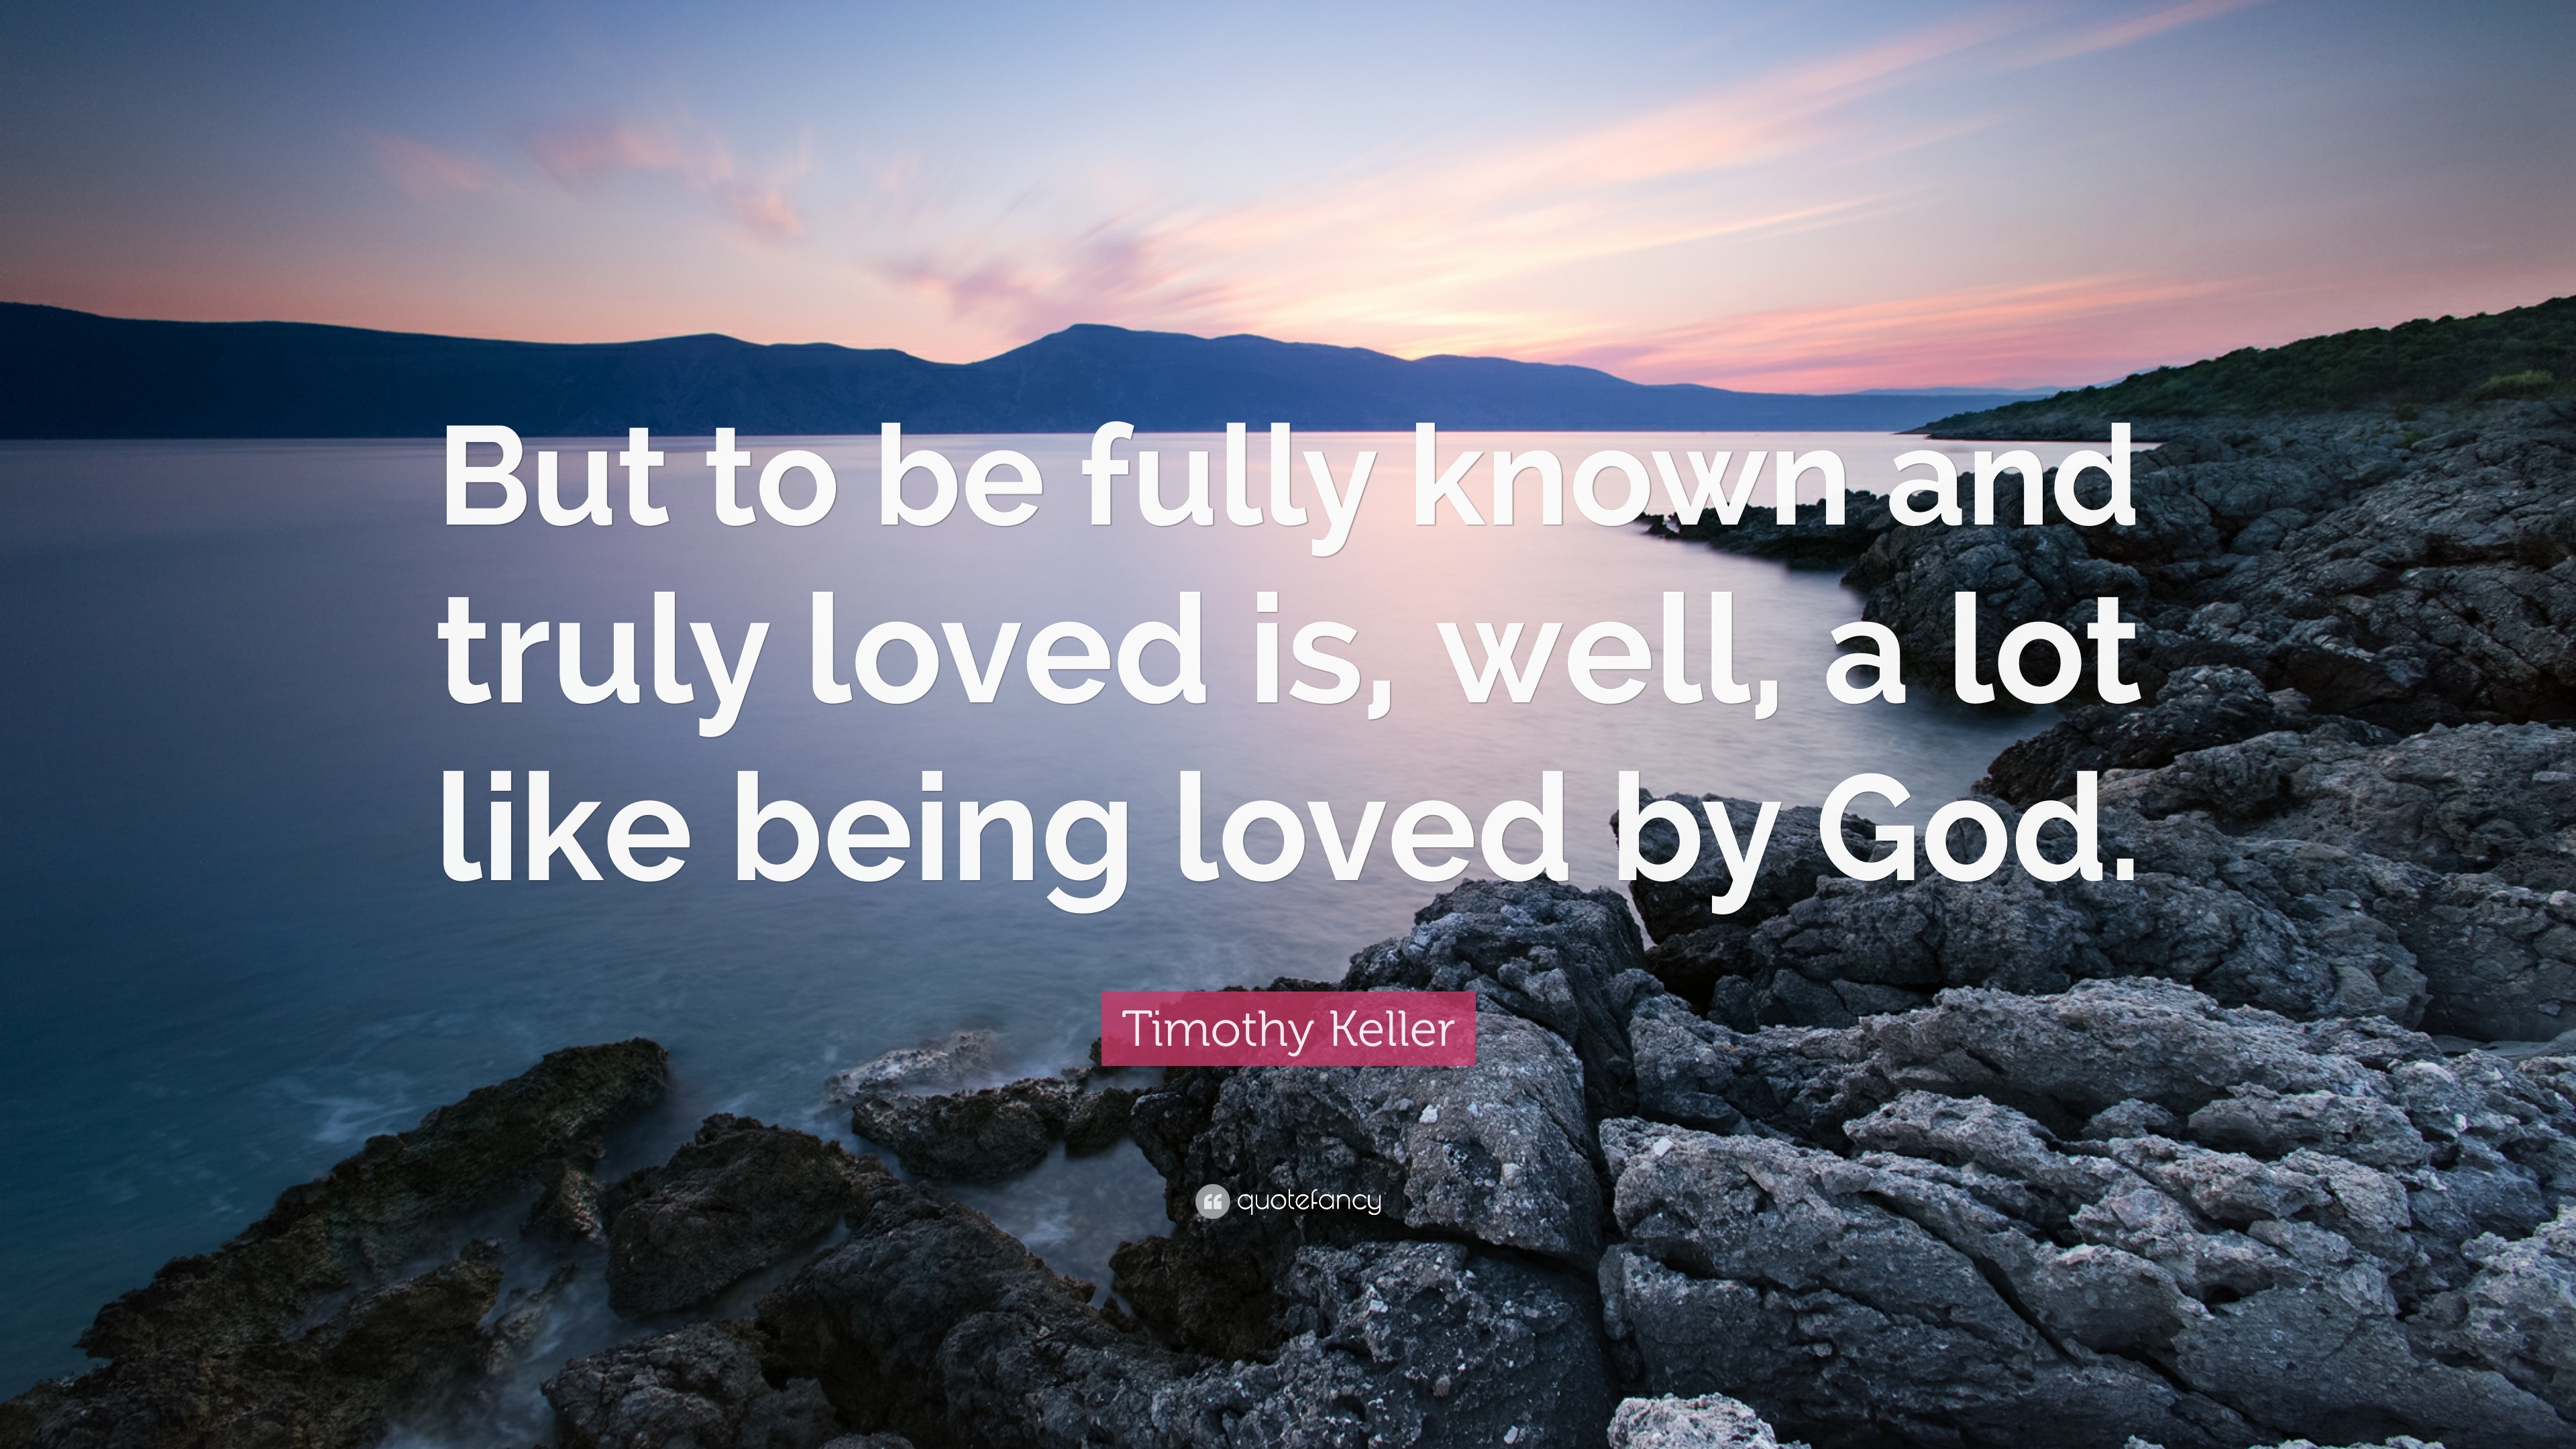 Timothy Keller Quote: “But to be fully known and truly loved is, well, a lot like